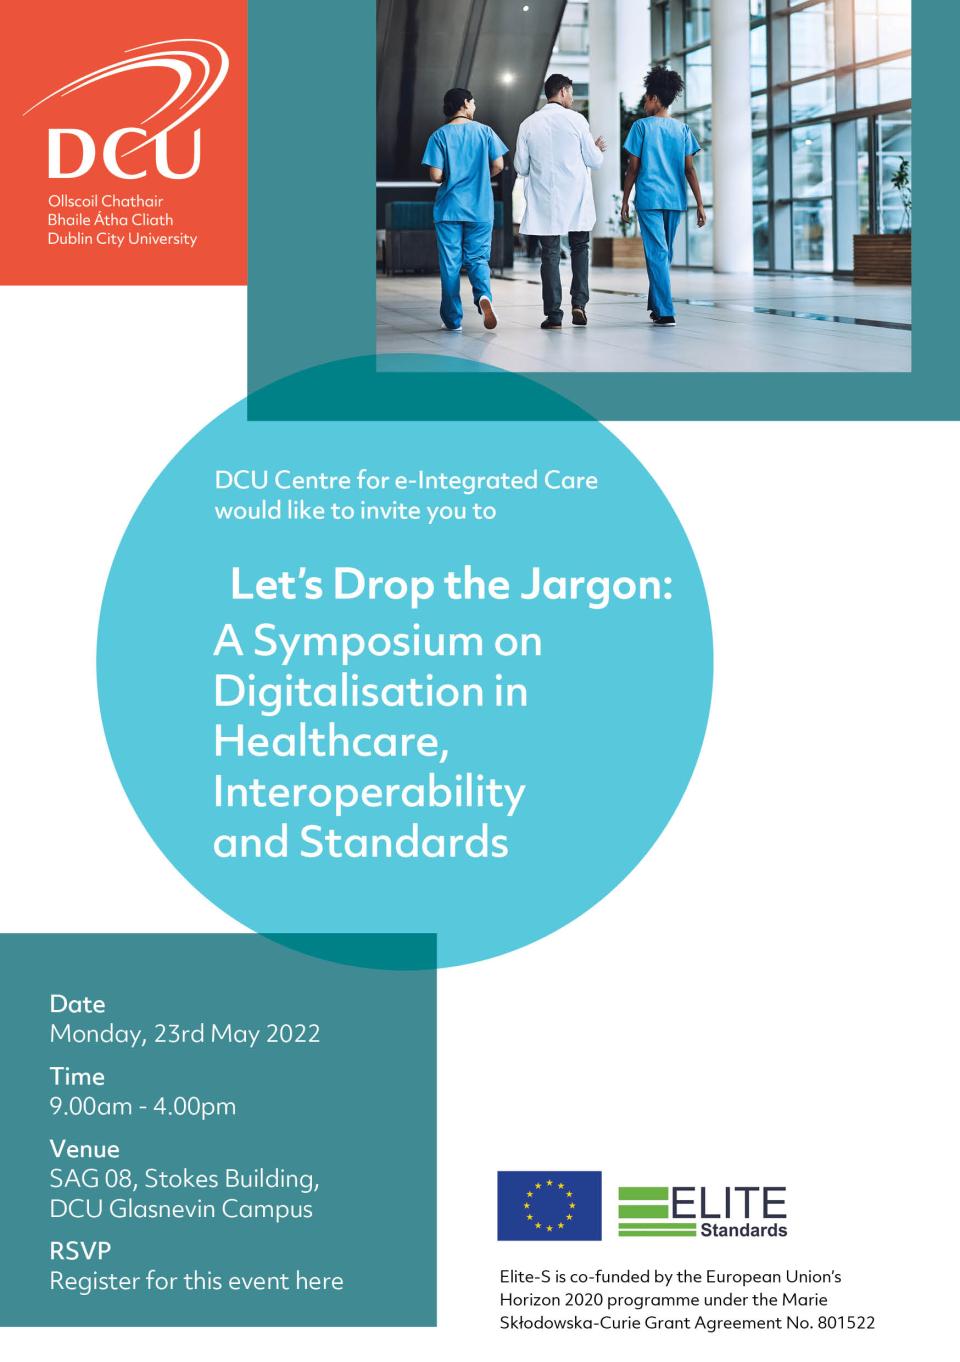 Let's drop the jargon: A symposium on digitalisation in healthcare, interoperability and standards